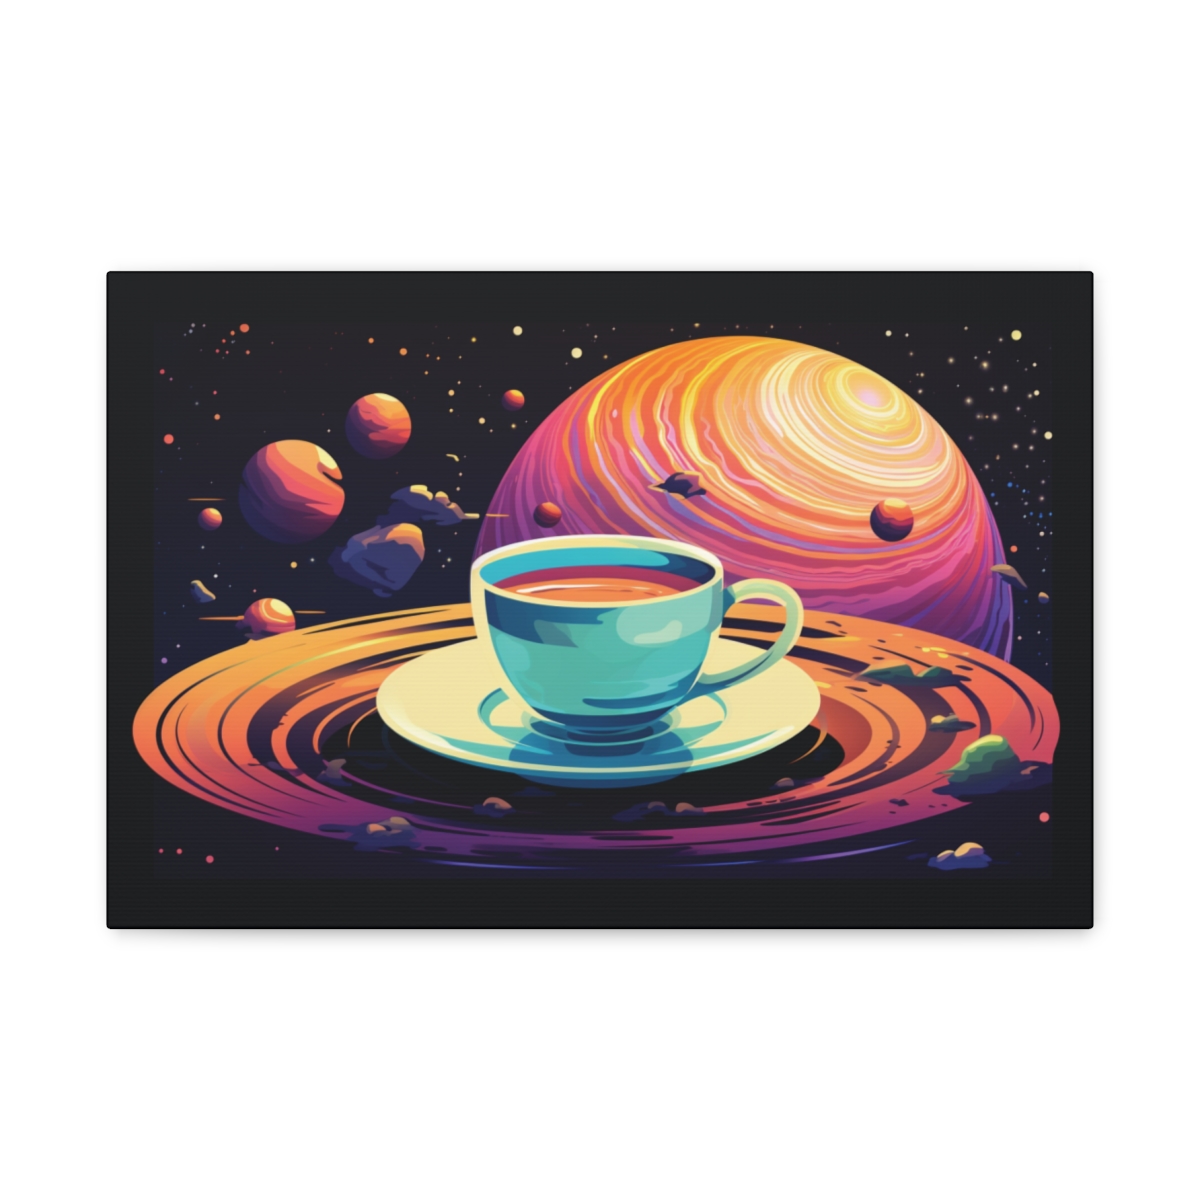 Retro Space Art: Chill And Caffeinate Yourself in Space